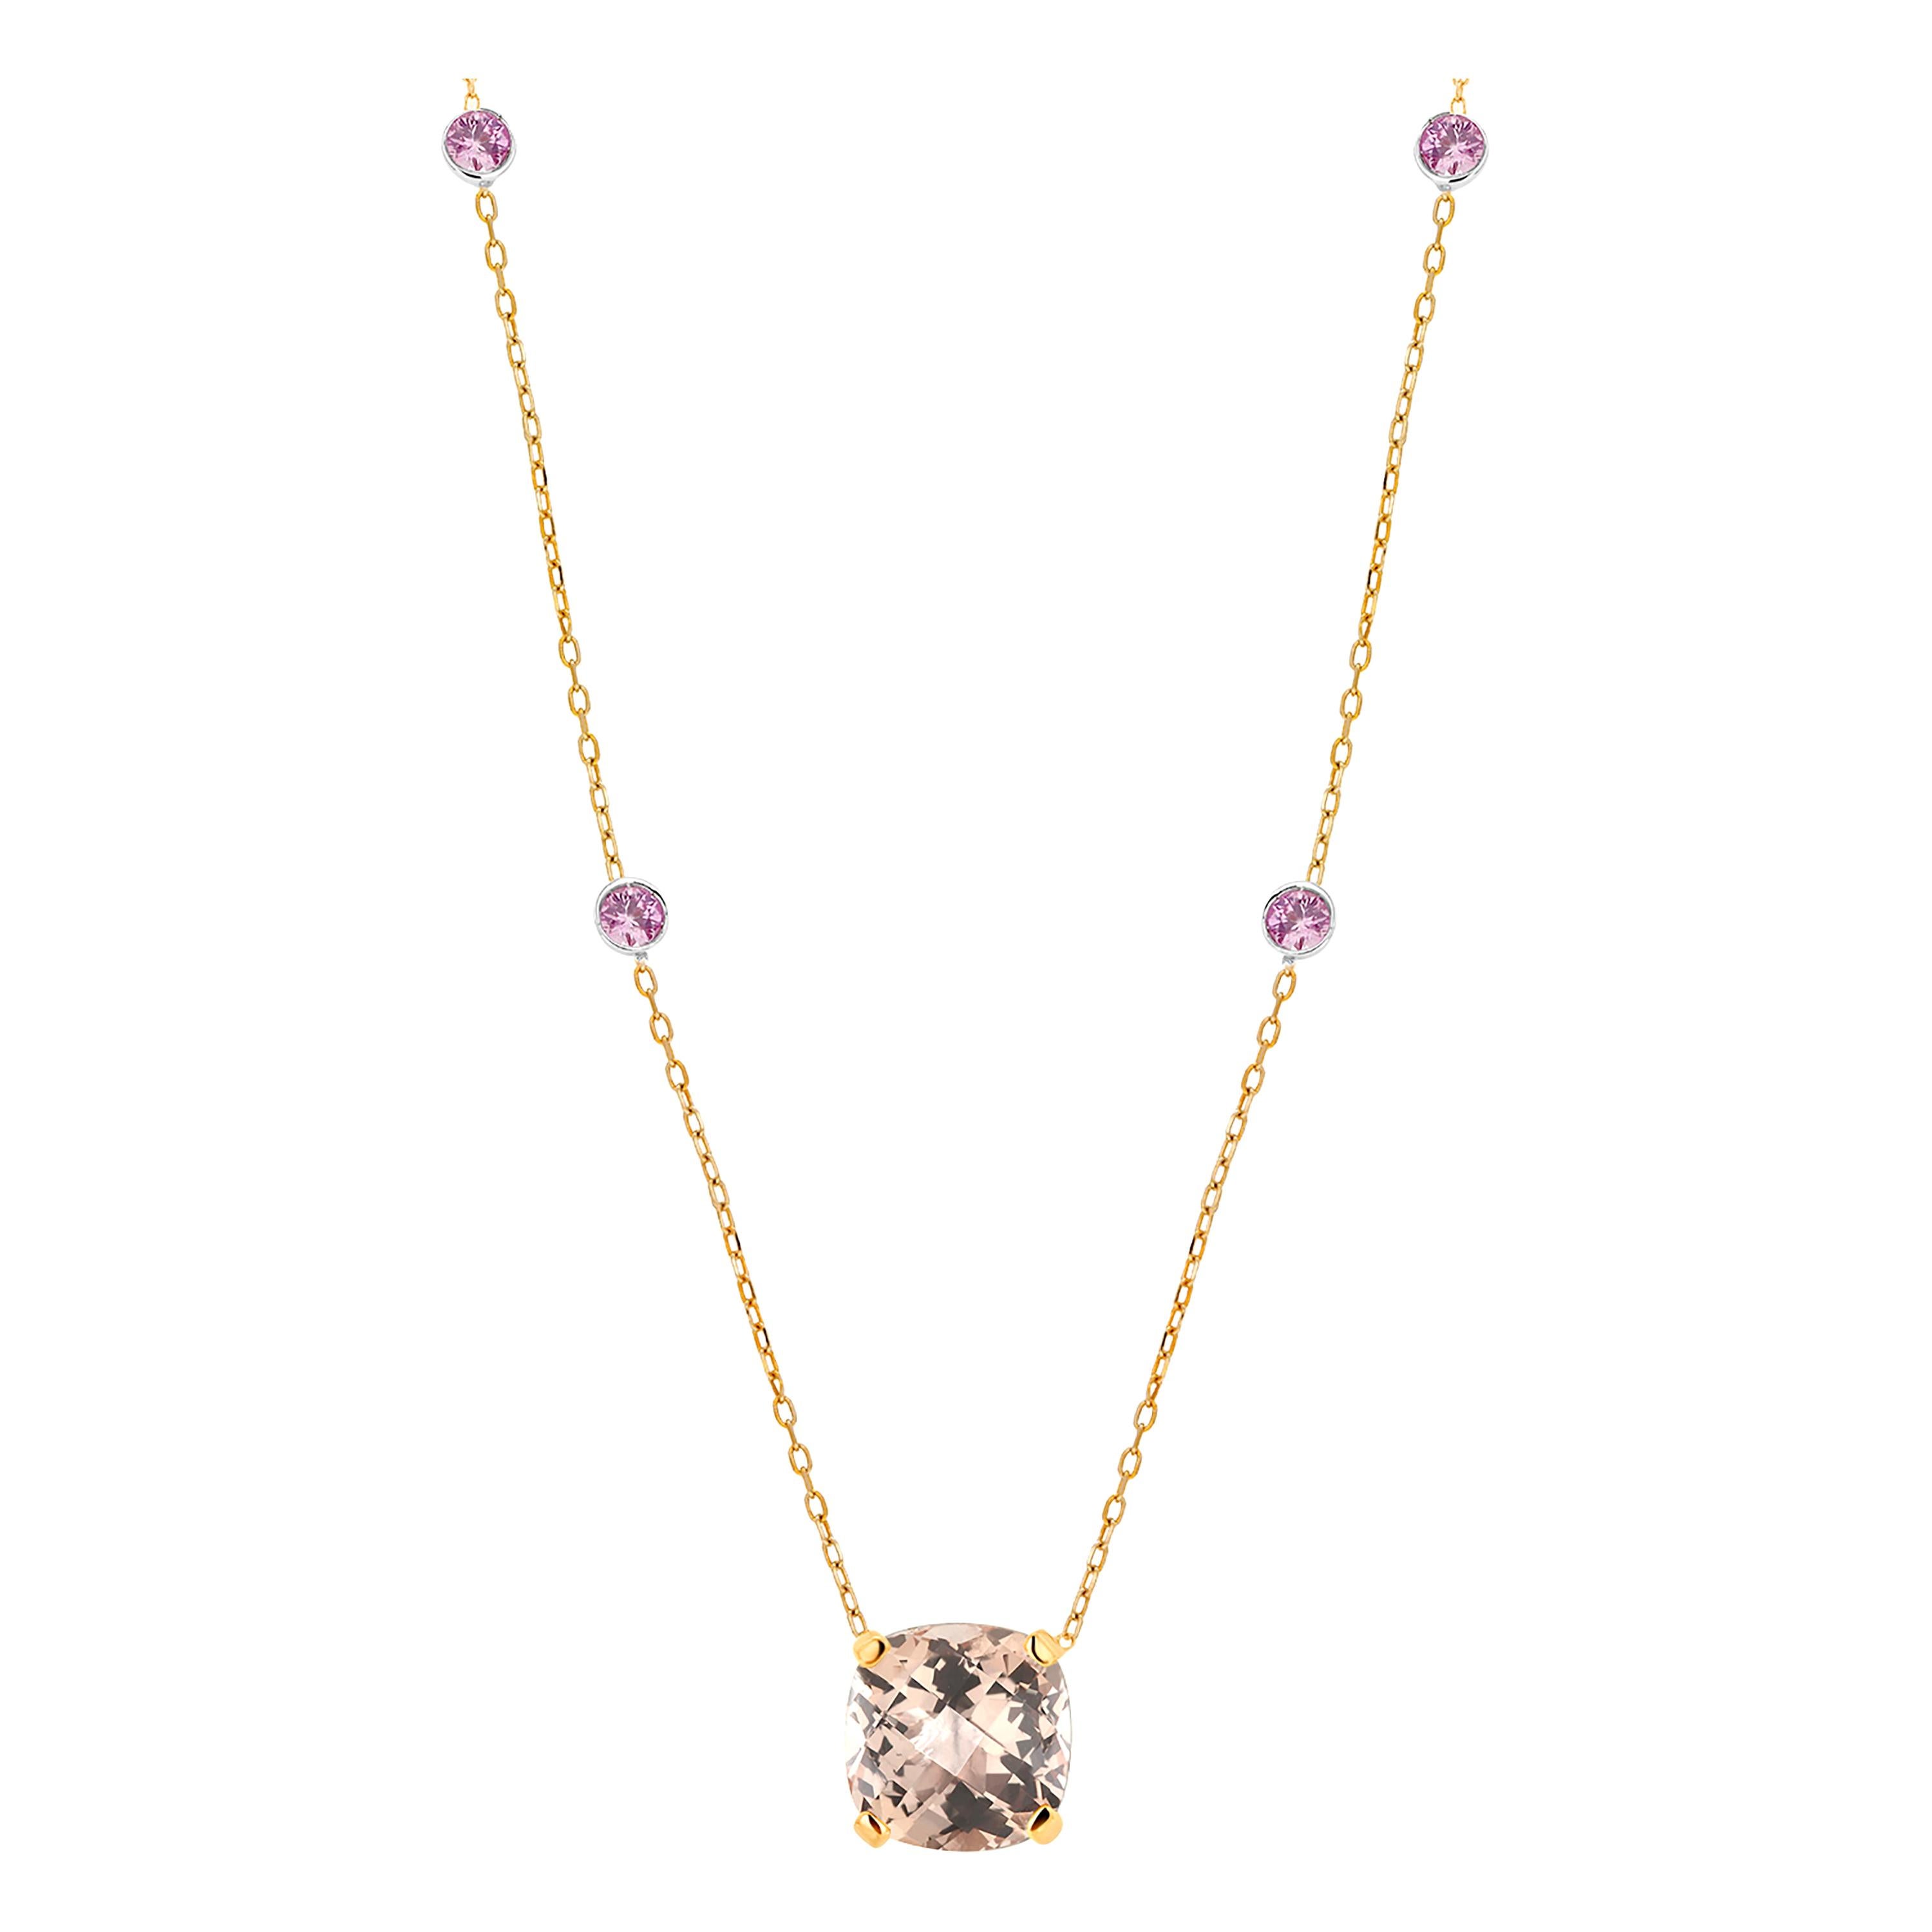 Cushion Shape Morganite Pink Sapphire Yellow and White Gold Pendant Necklace